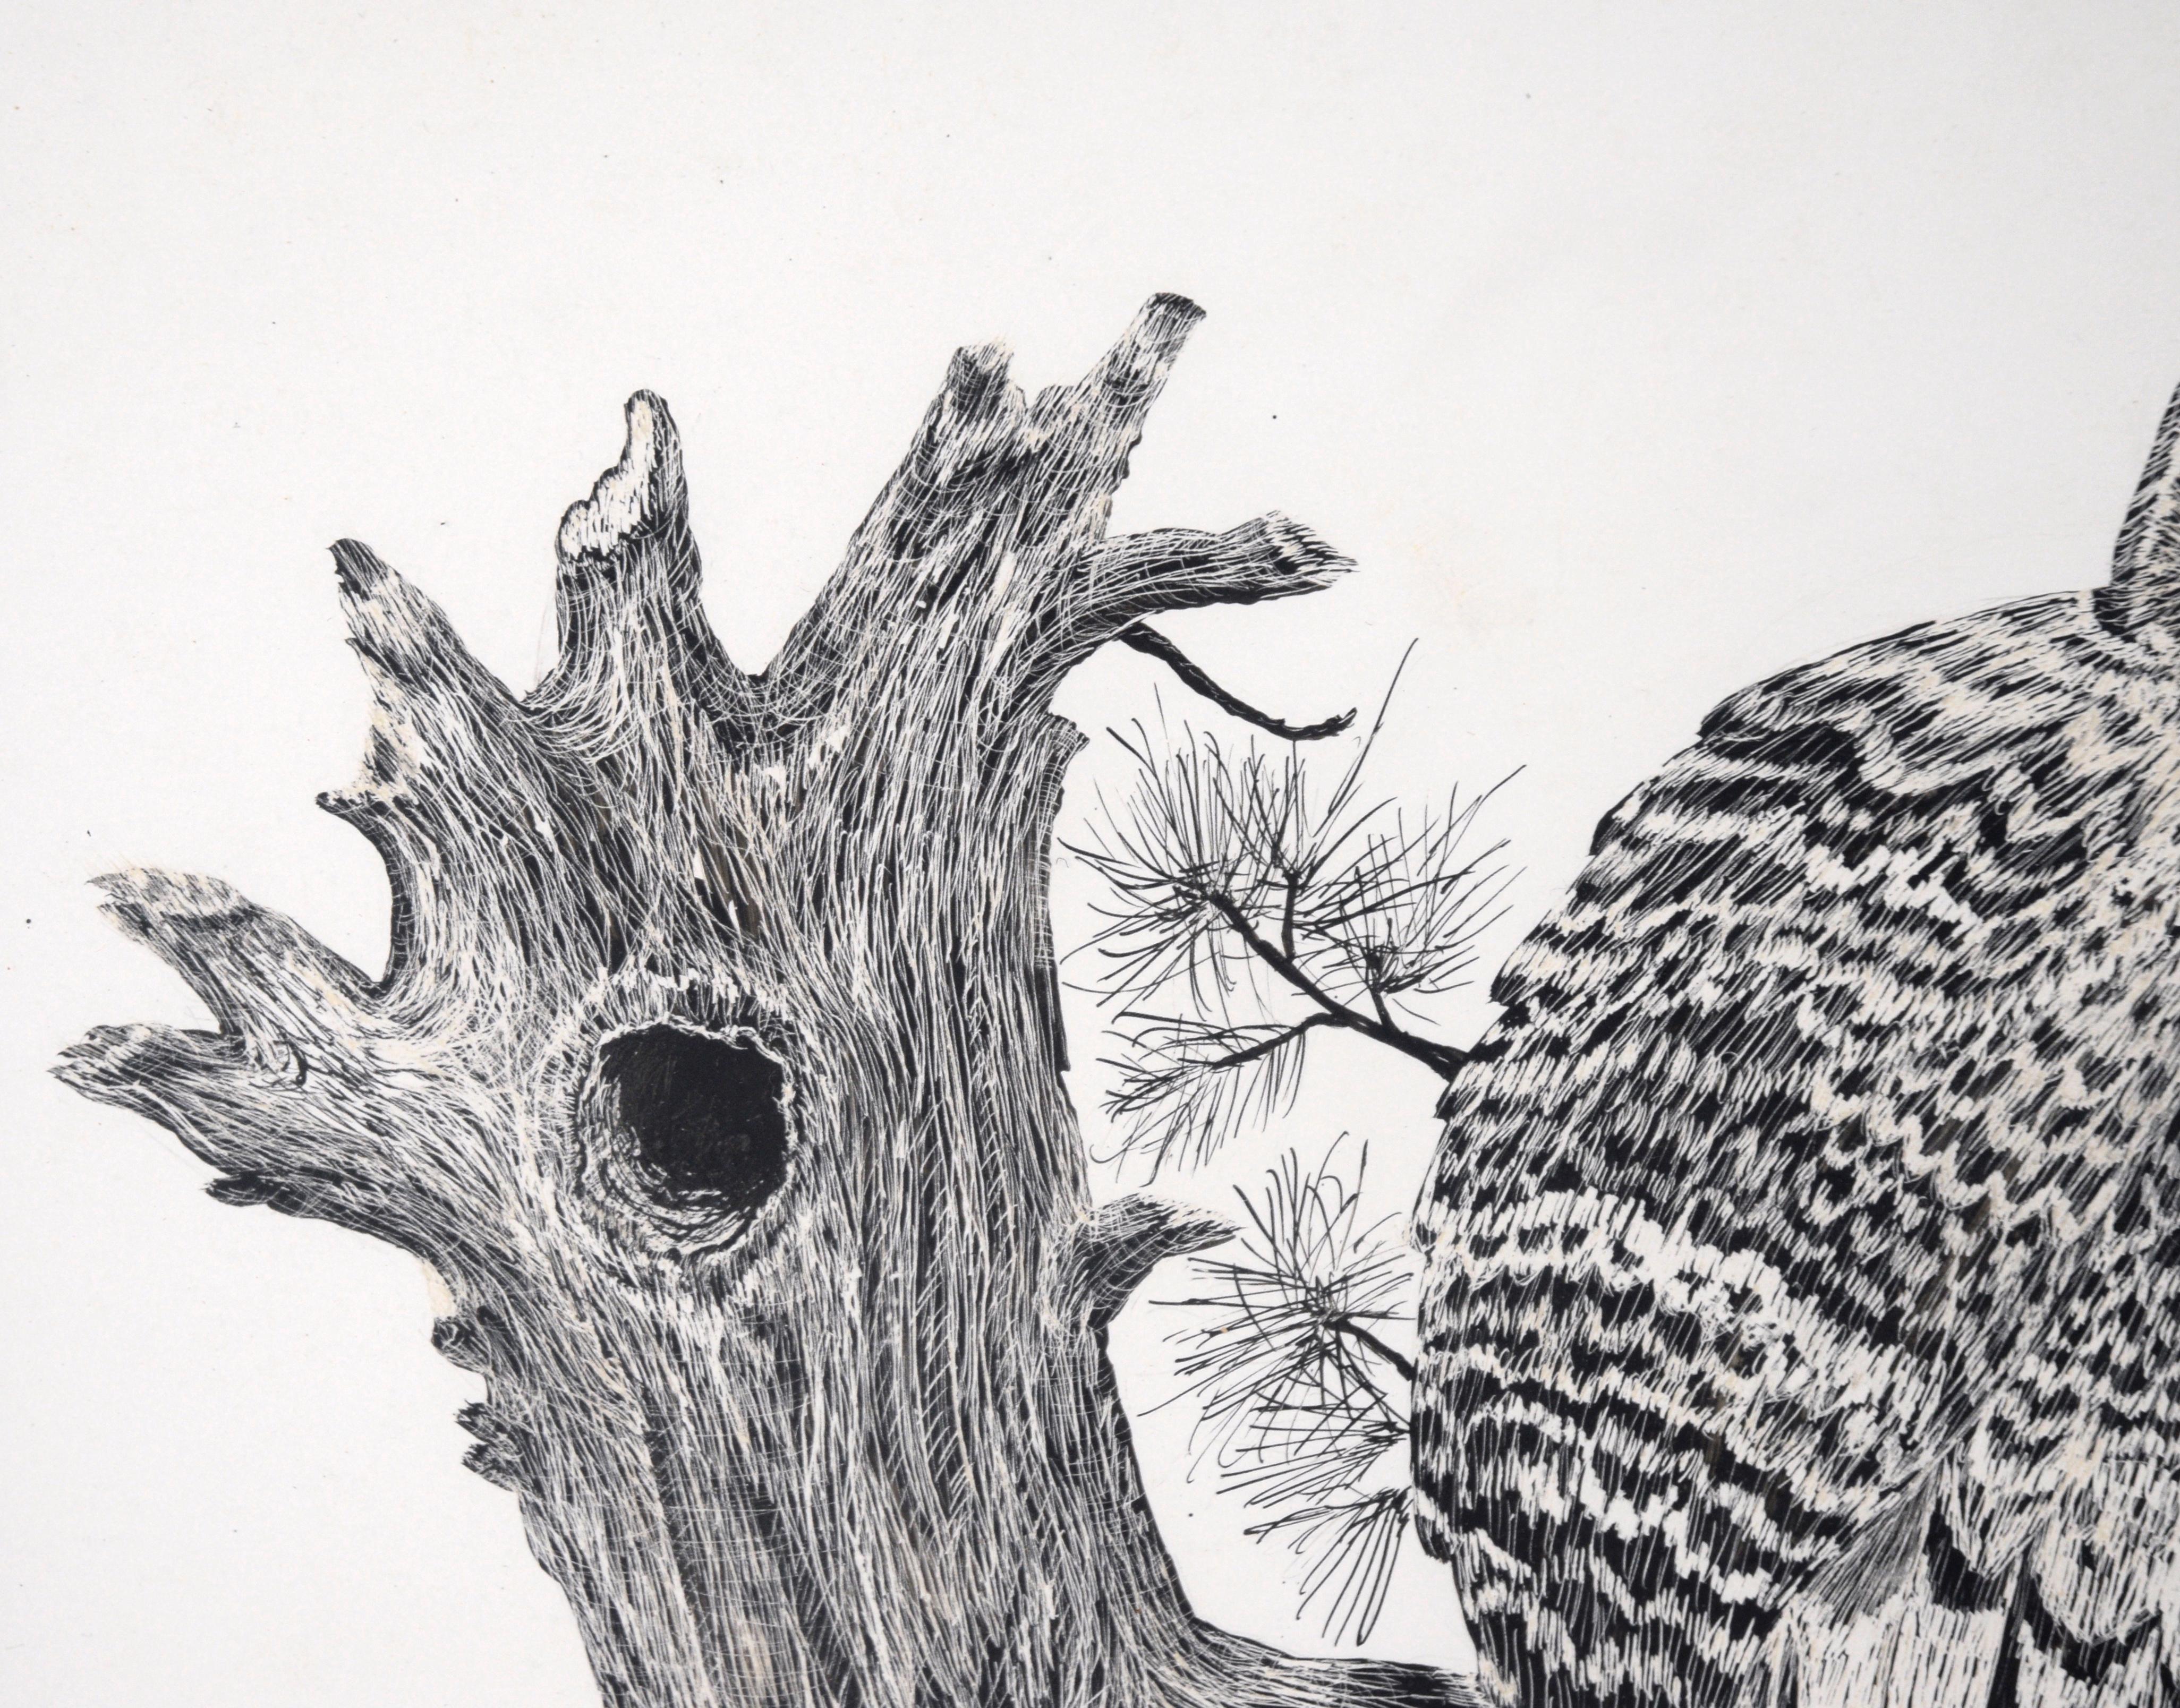 Great Horned Owl Sitting on a Branch - Illustration in Ink on Cardstock - Contemporary Art by M. Kochmaruk